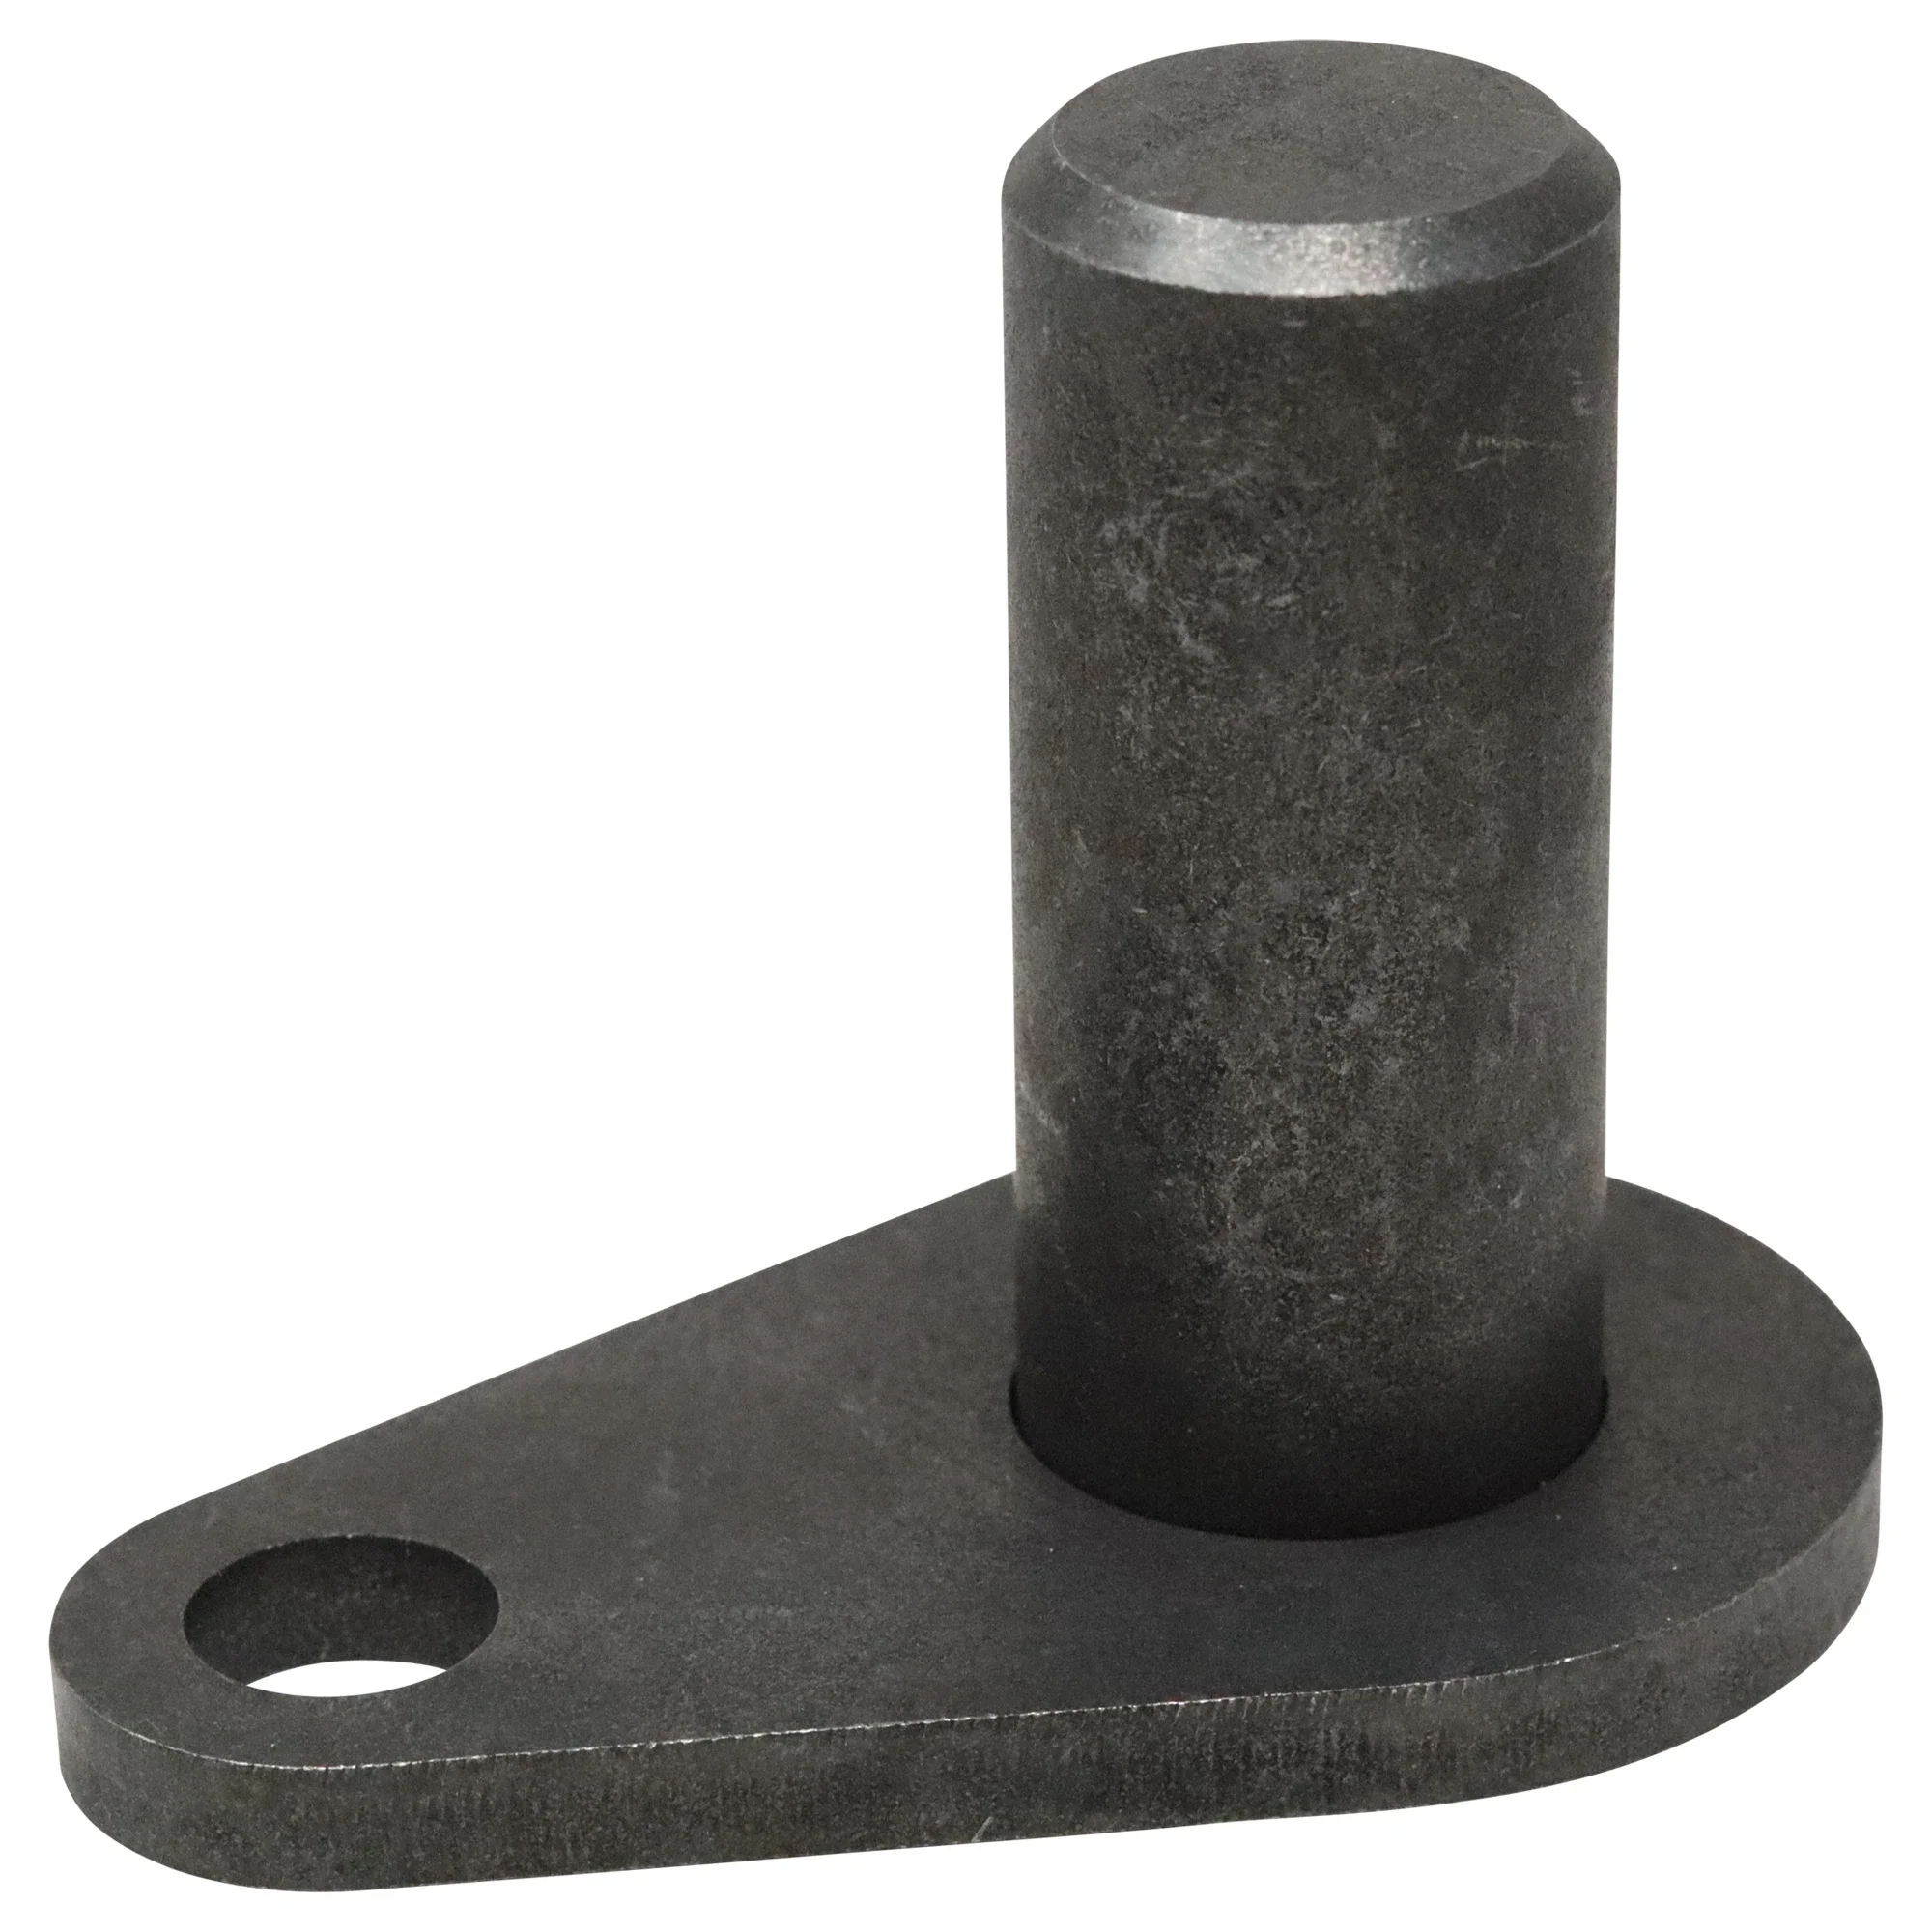 Wastebuilt® Replacement for Heil 1" x 2-5/16" Pin Weldment